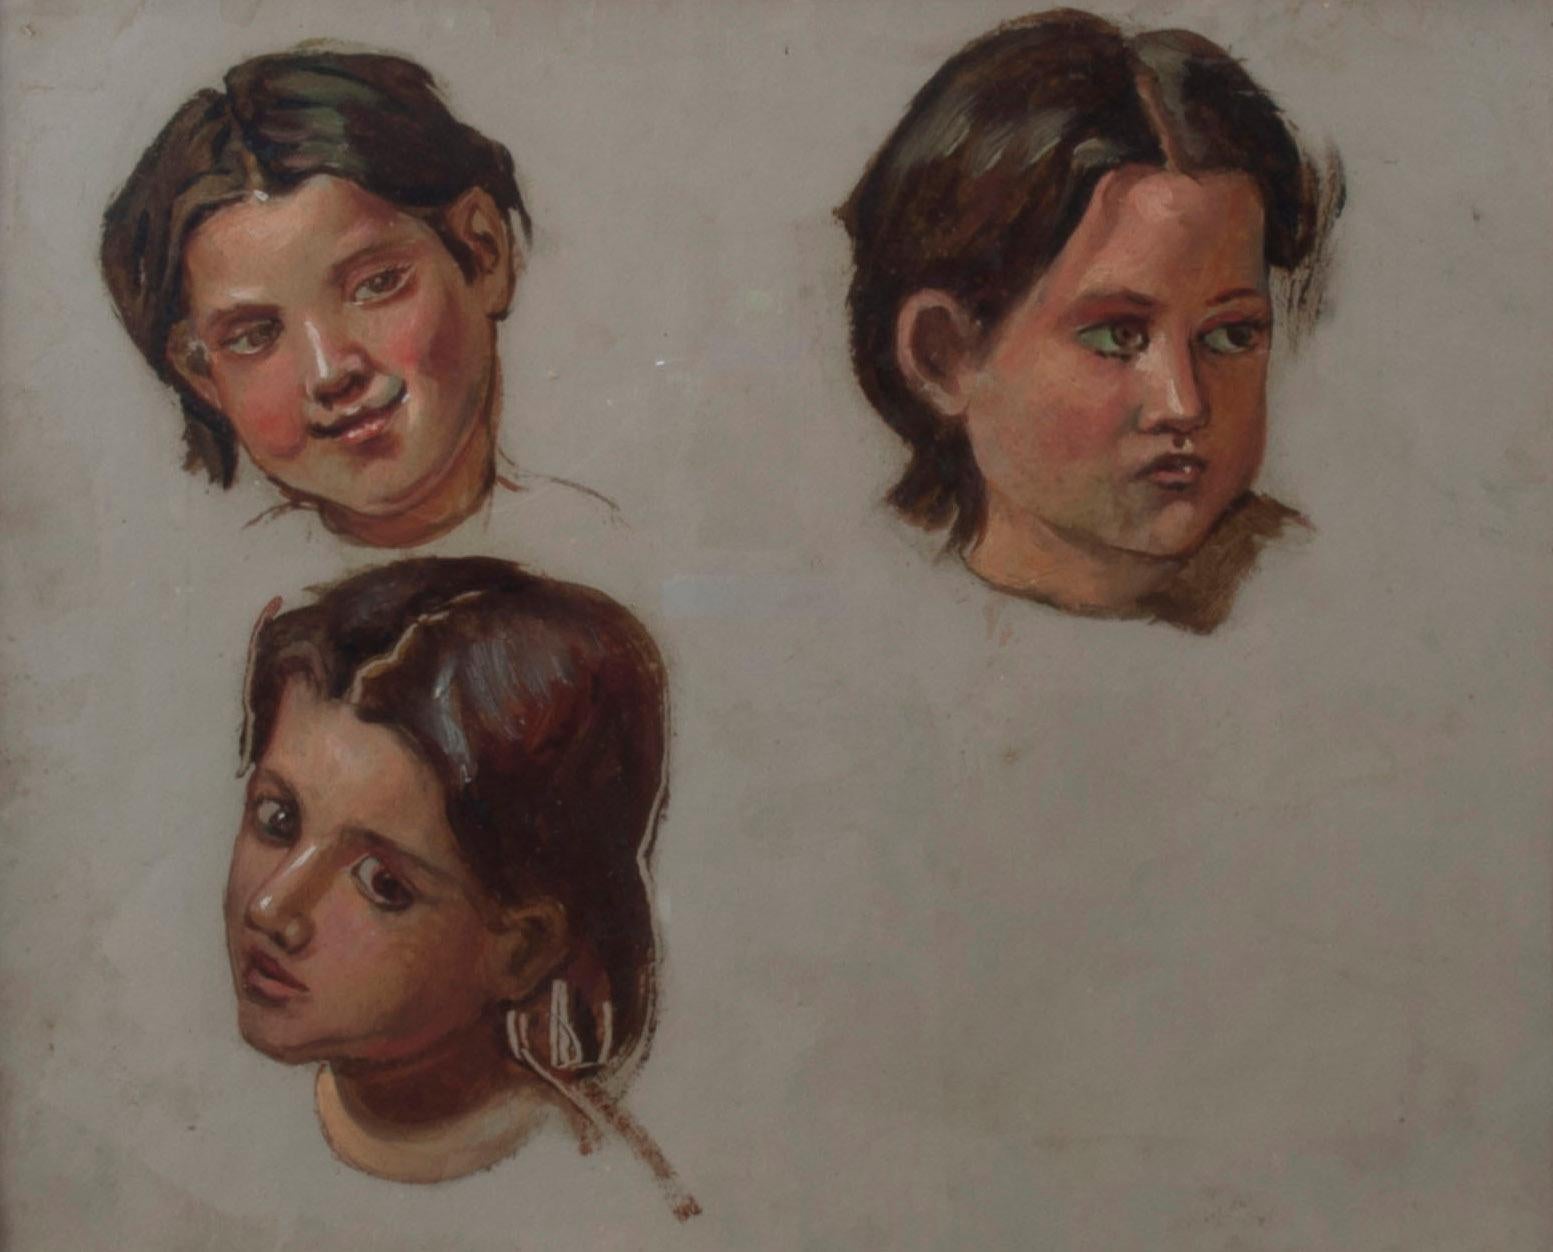 Hippolyte Roques (active 1838-1864)
Three Head Portraits of a Young Girl
Oil on grey wove paper, c. 1850
Unsigned
Provenance: Estate of the artist
                     Shepherd Gallery, New York (see label)
                     Ms. Millie Moorman